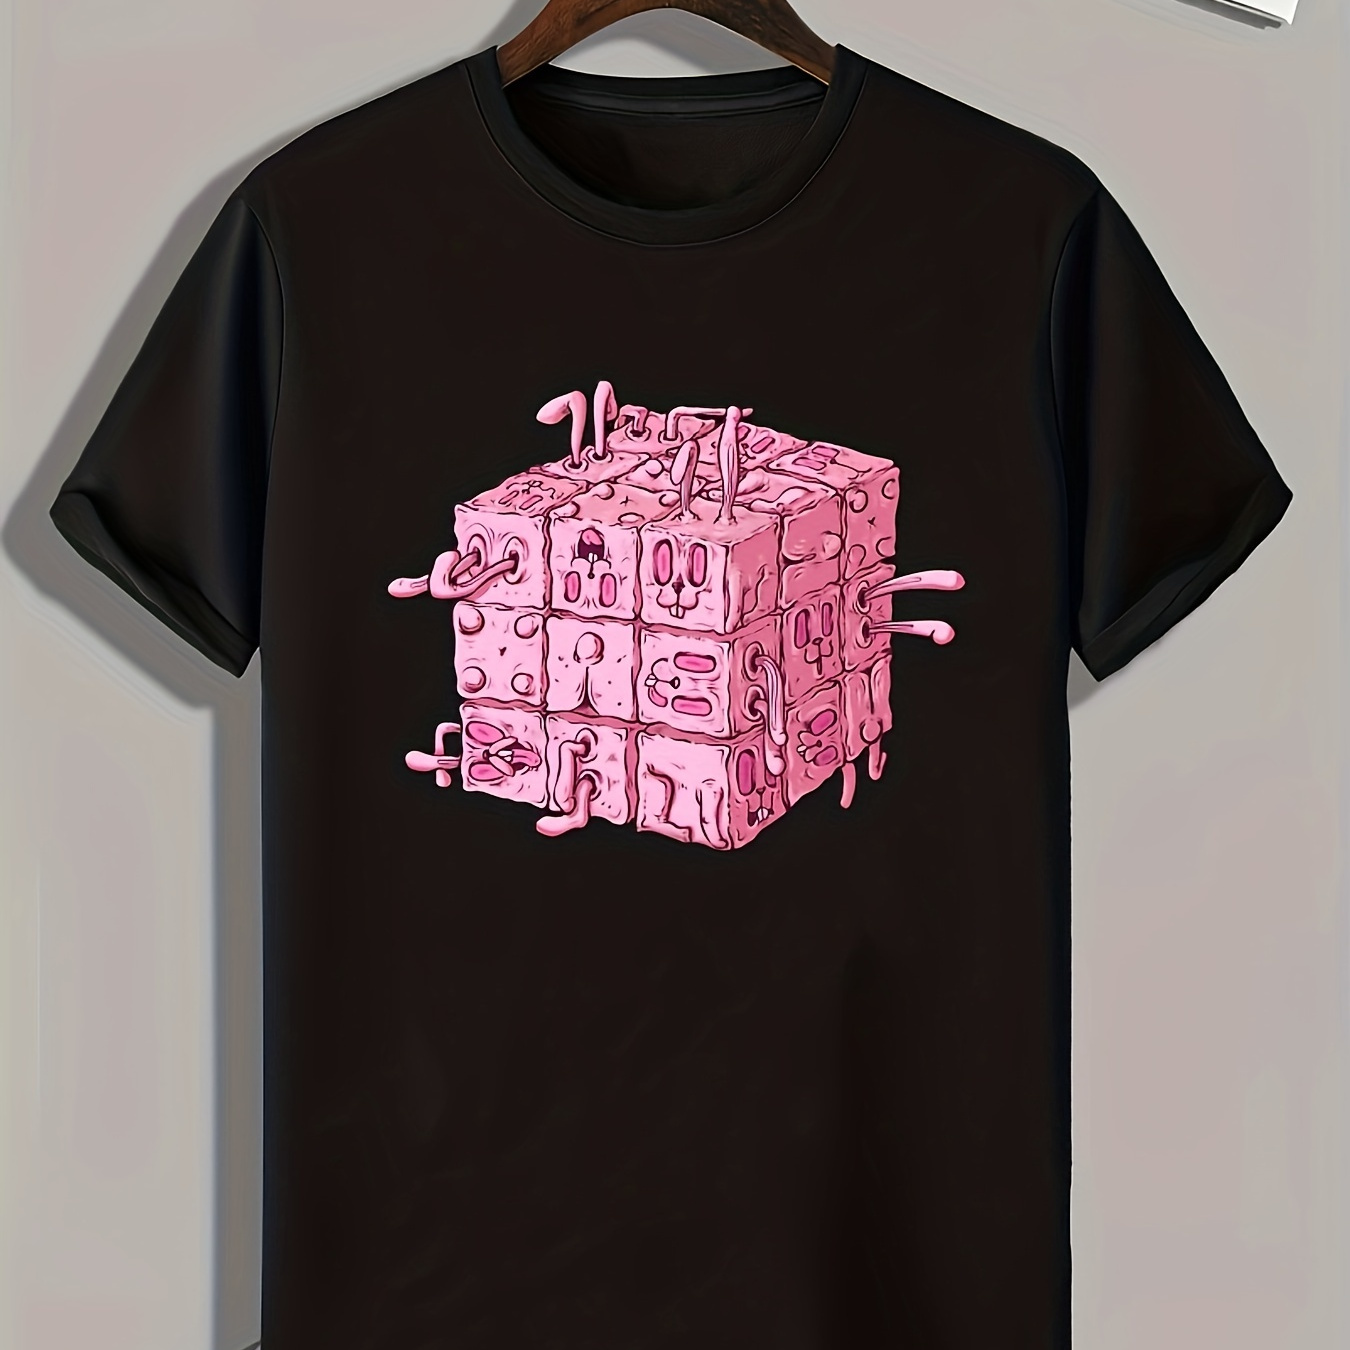 

Cube Print, Men's Graphic T-shirt, Casual Comfy Tees For Summer, Men's Clothing